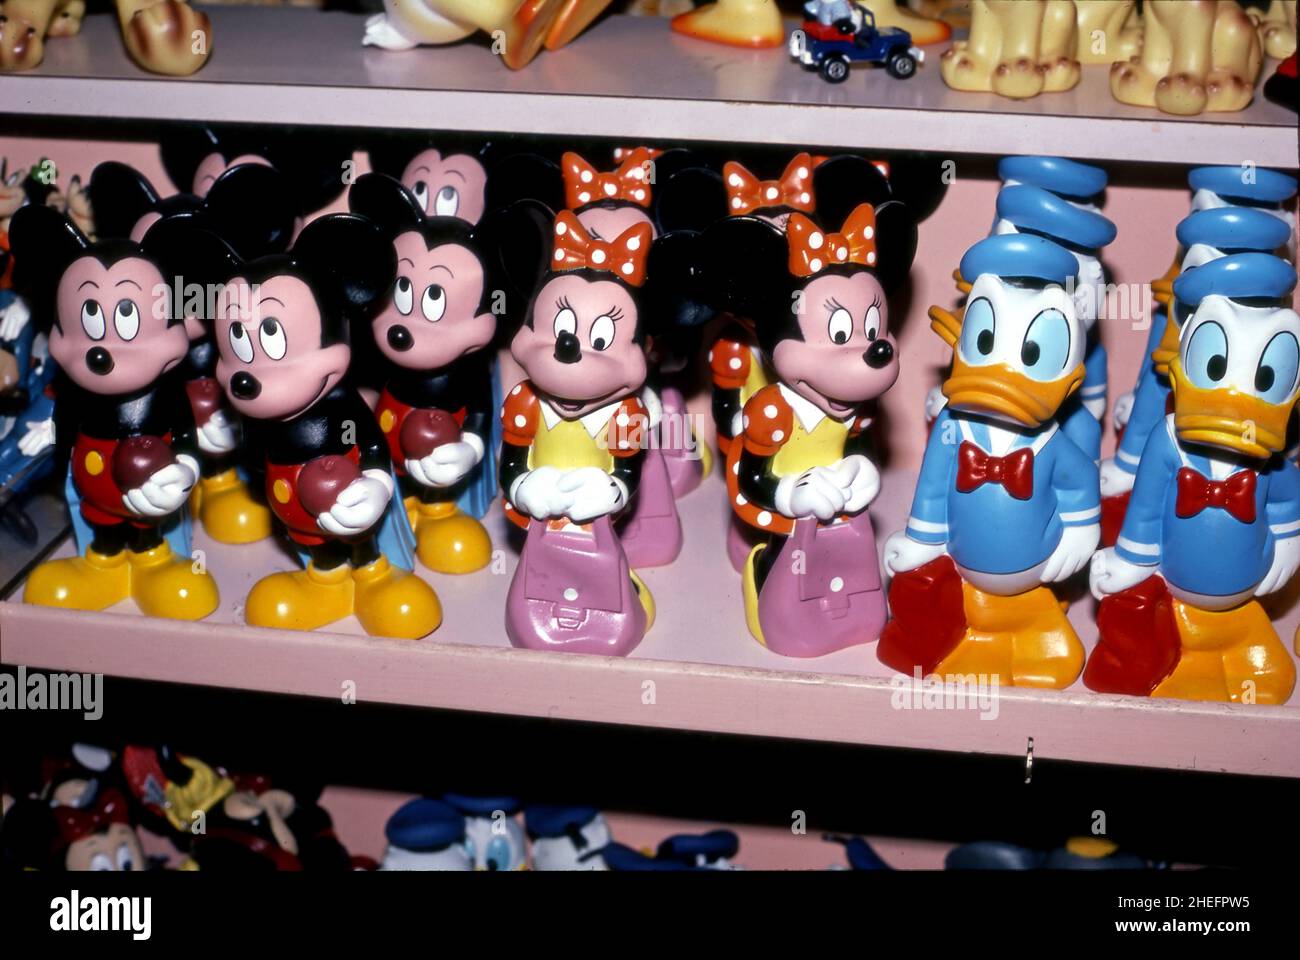 Souvenir toys of iconic Disney characters on dale at Disnelyand in Anaheim, CA Stock Photo